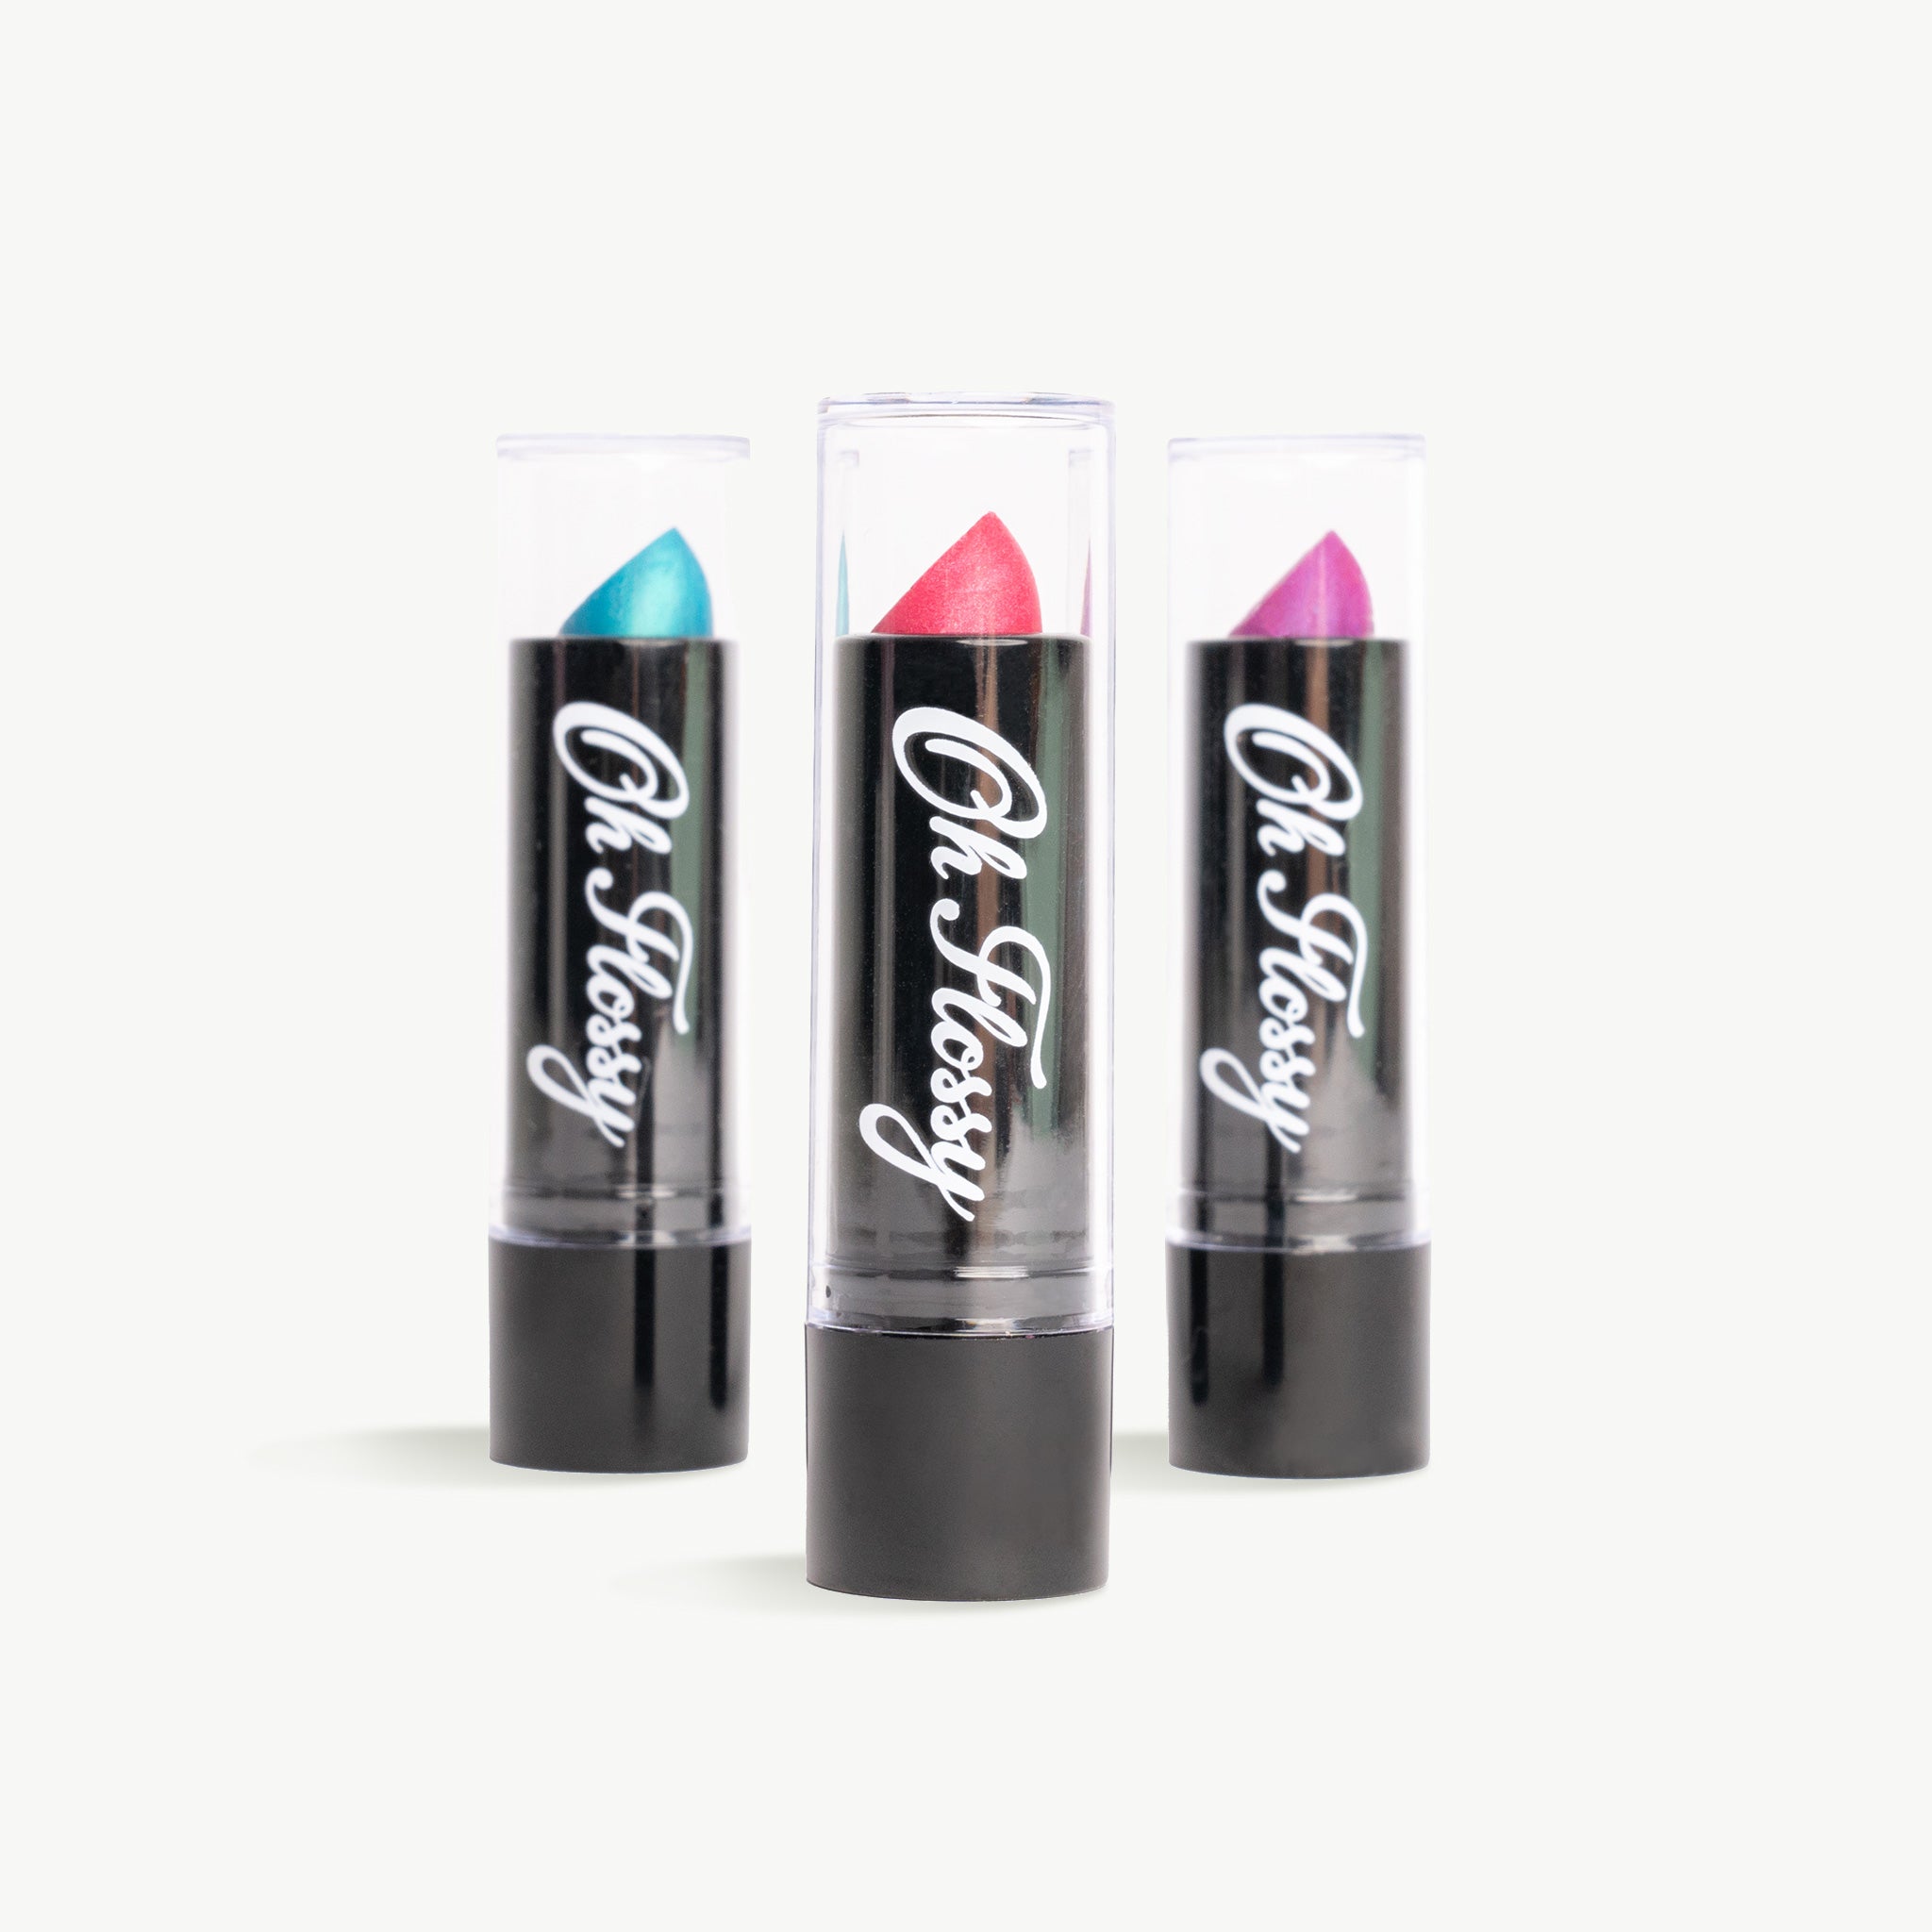    Oh-Flossy_Natural-Kids-Makeup-Lipstick-trio-02